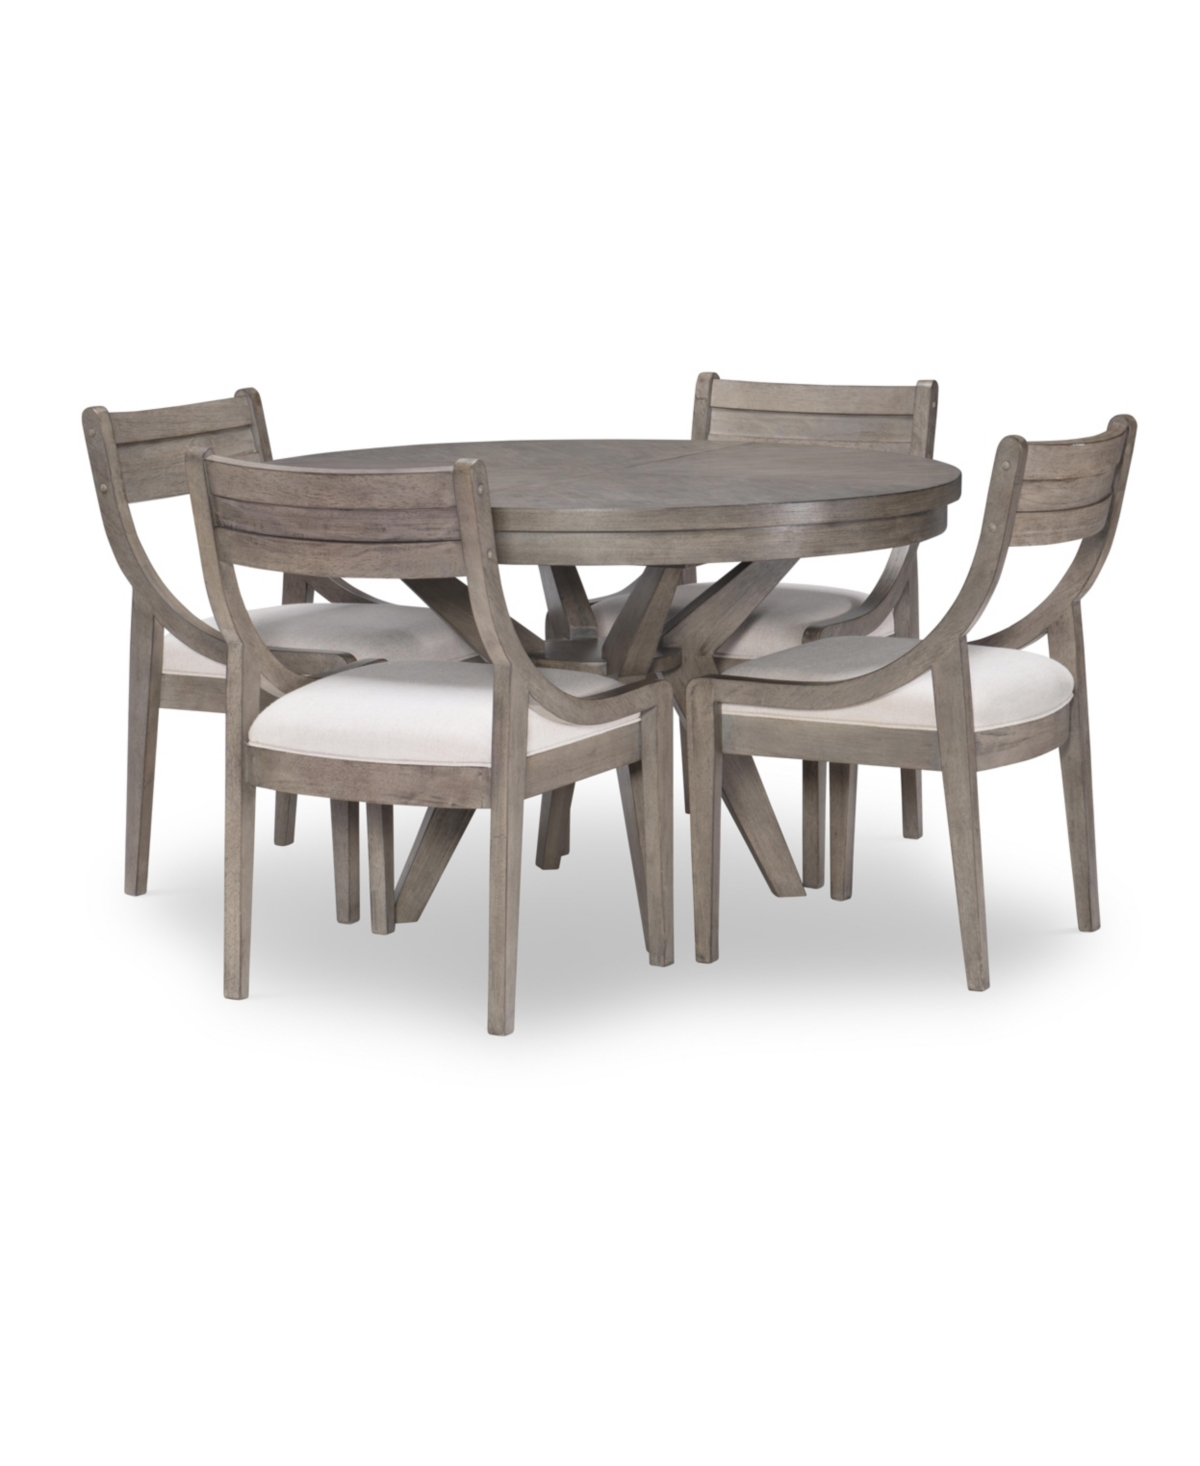 Macy's Greystone Ii 5pc Dining Set (round Table & 4 Side Chairs)